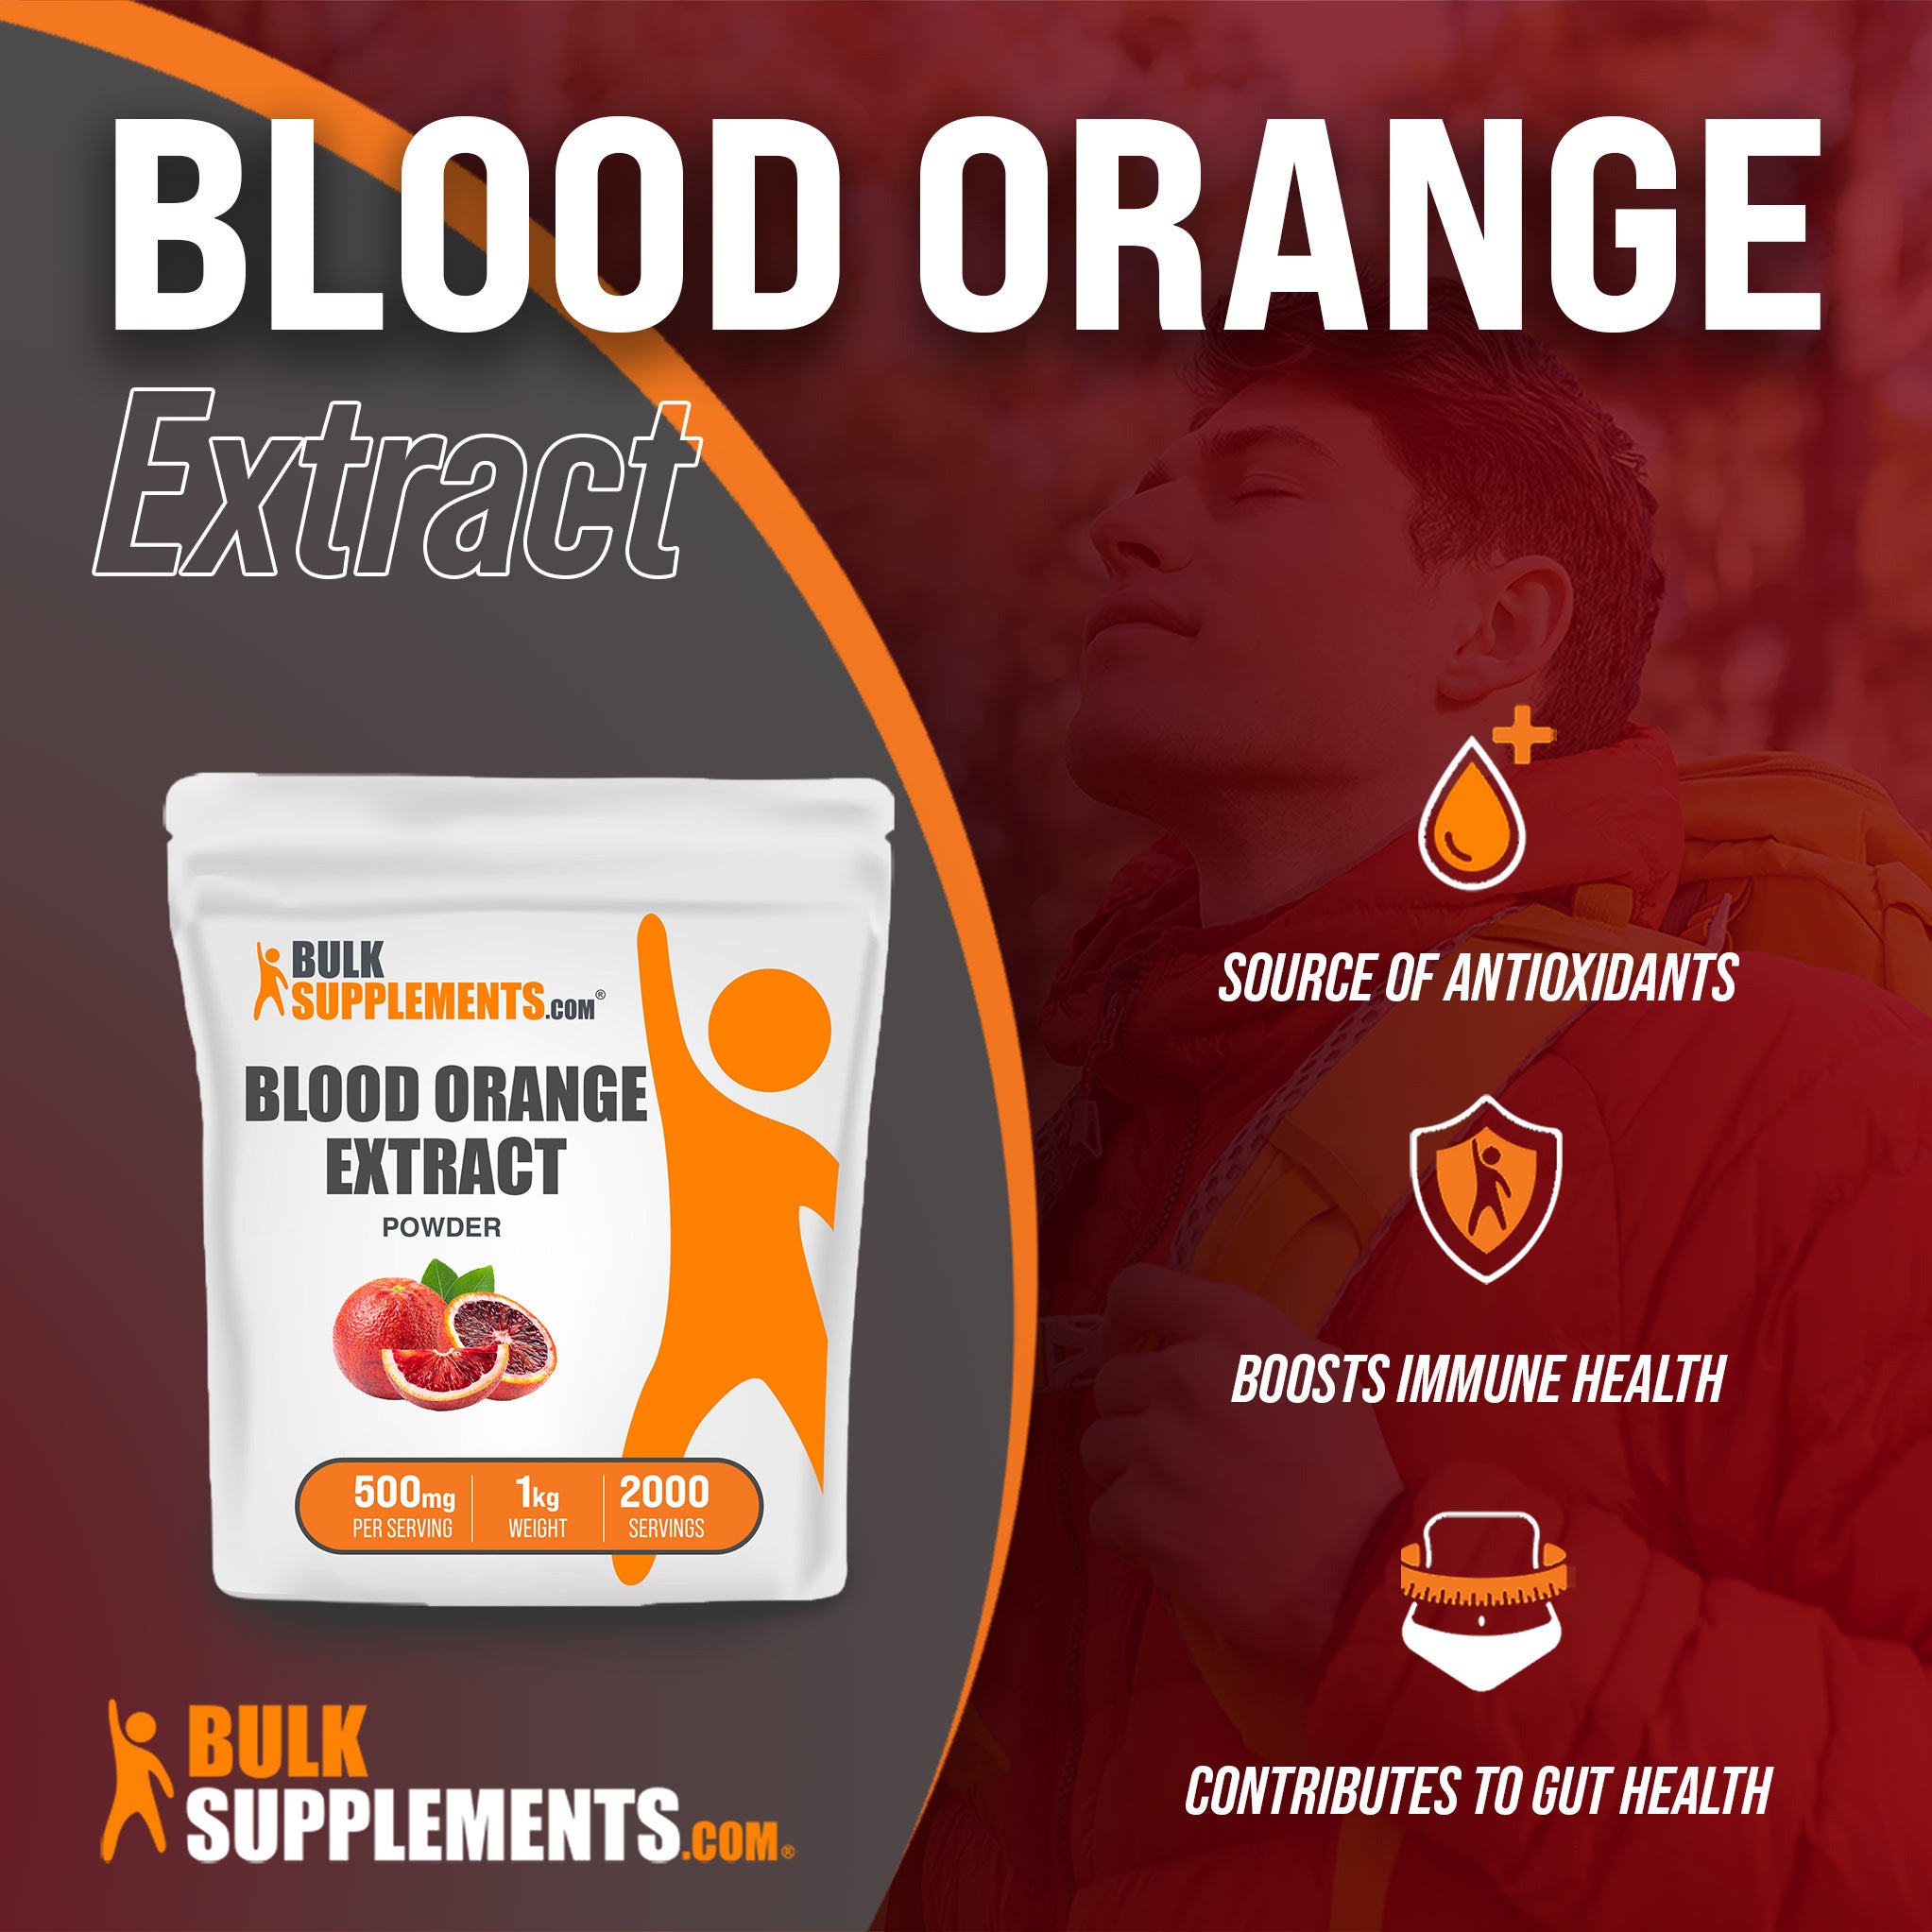 Benefits of Blood Orange Extract; source of antioxidants, boosts immune health, contributes to gut health